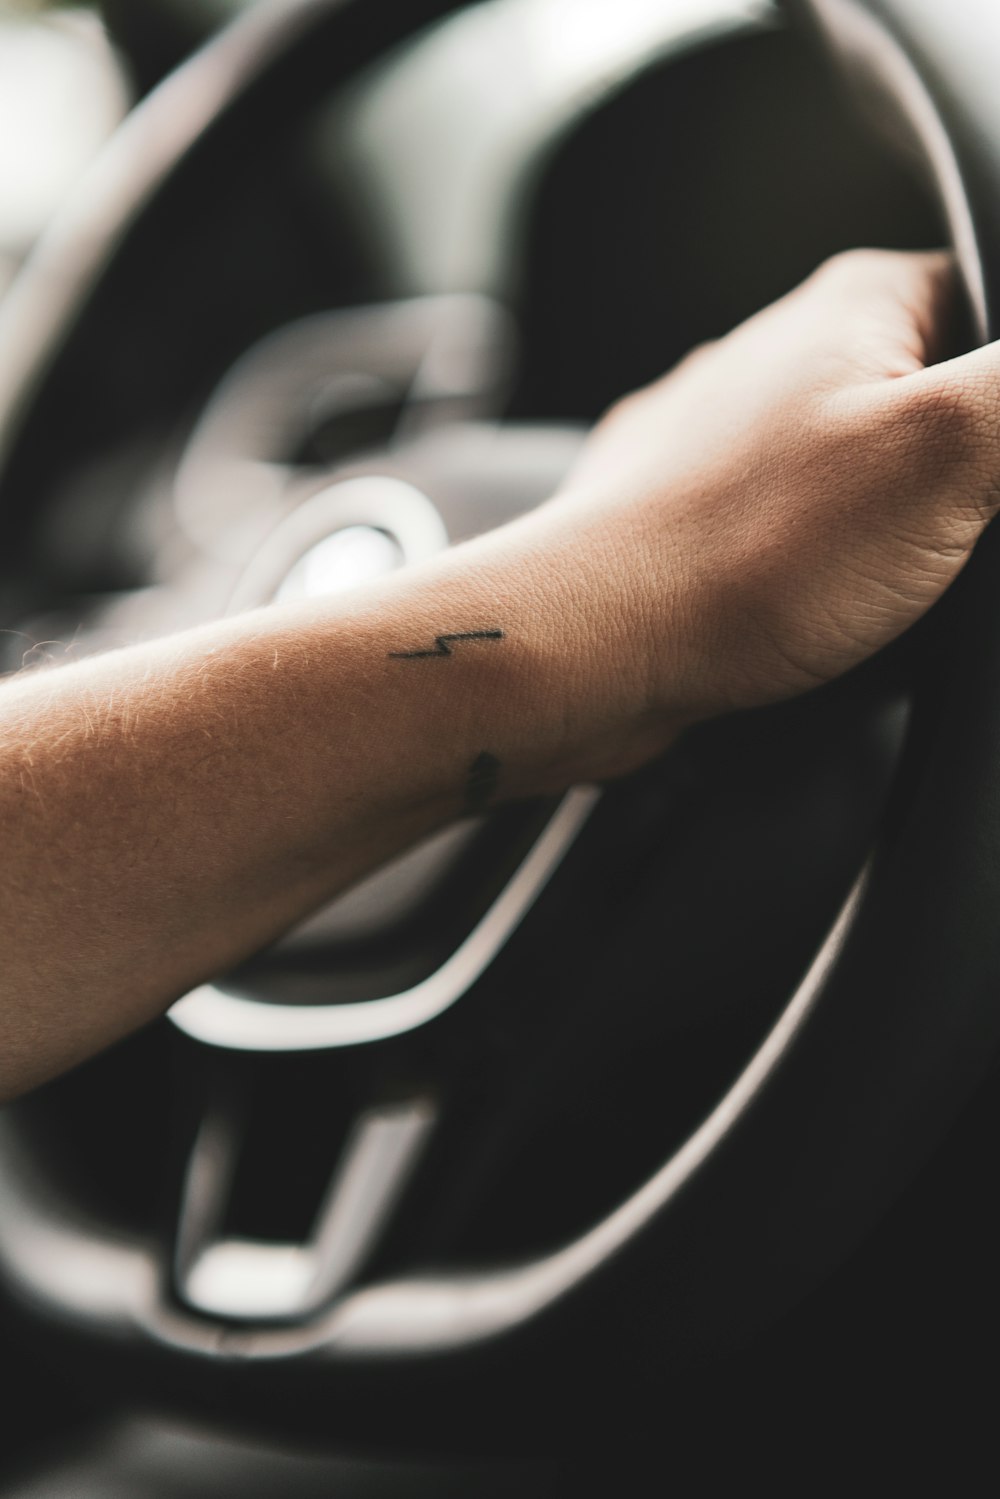 person holding steering wheel